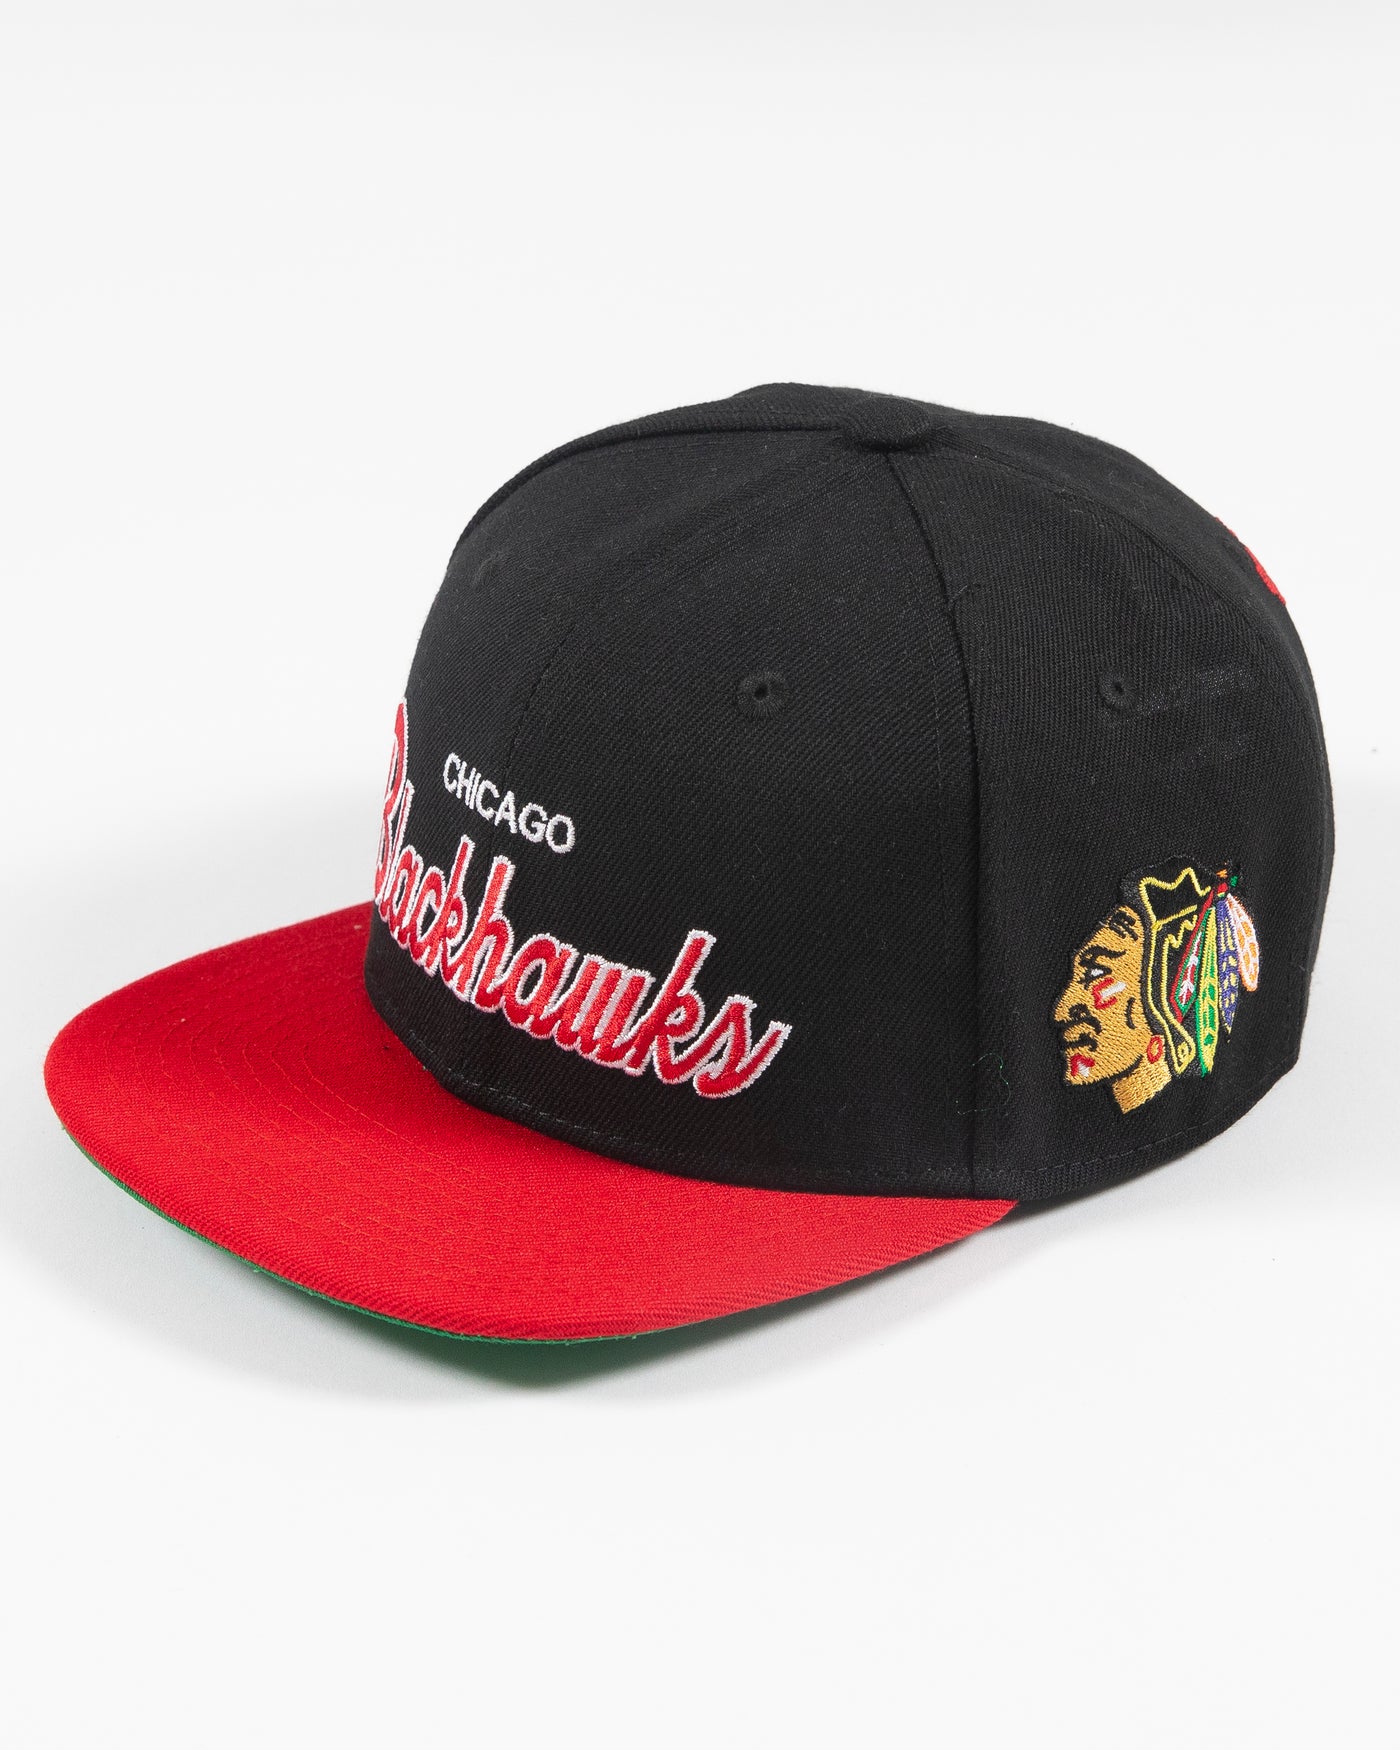 black and red Mitchell & Ness youth snapback cap with Chicago Blackhawks wordmark embroidered on front and primary logo embroidered on left side - left angle lay flat